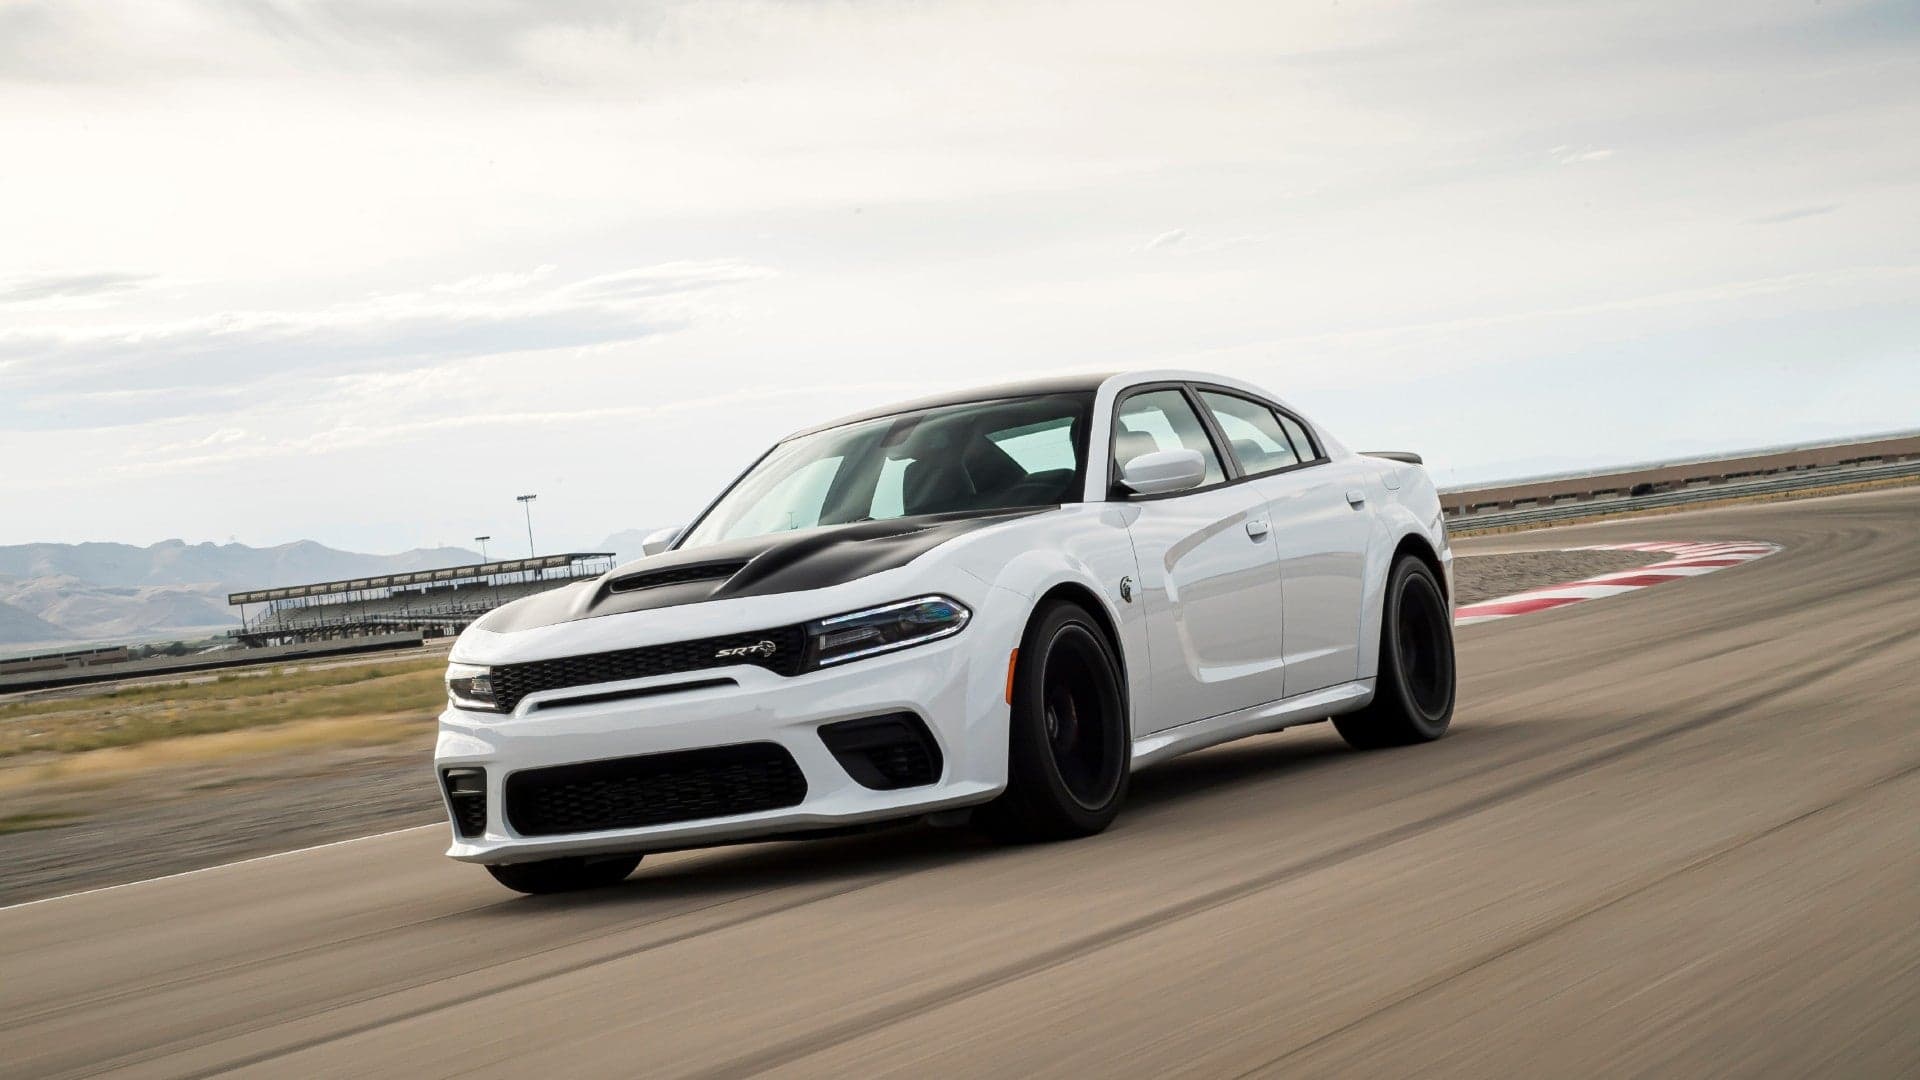 2021 Dodge Charger Hellcat Redeye: 797 HP And a 10-Second Quarter-Mile Stock